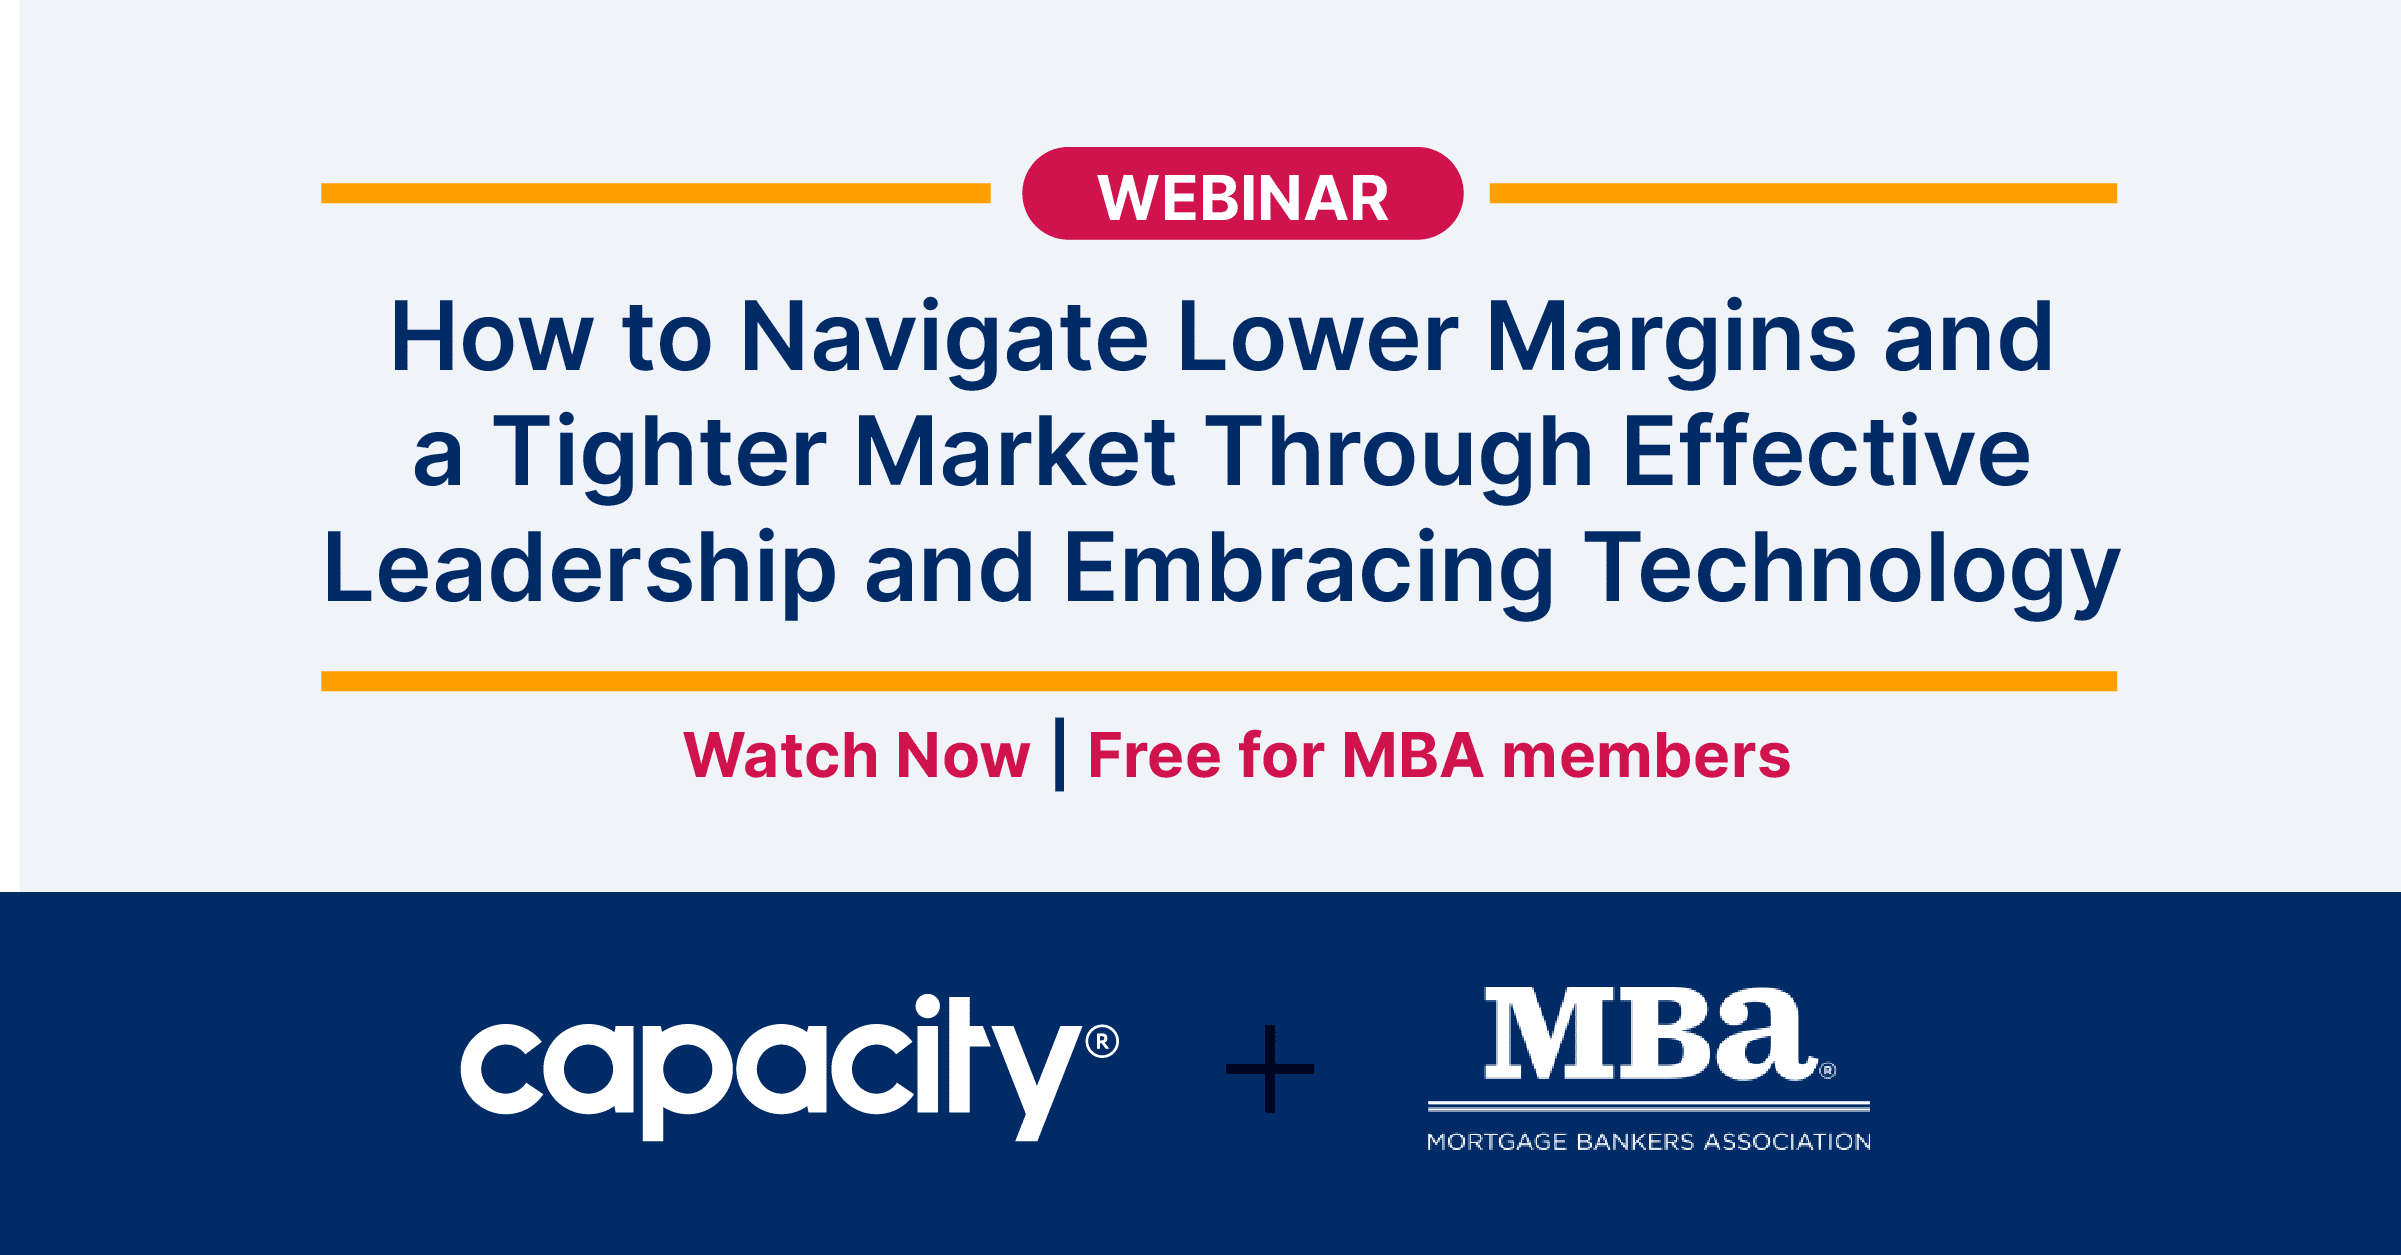 MBA Webinar: How to Navigate Lower Margins and a Tighter Market Through Effective Leadership and Embracing Technology